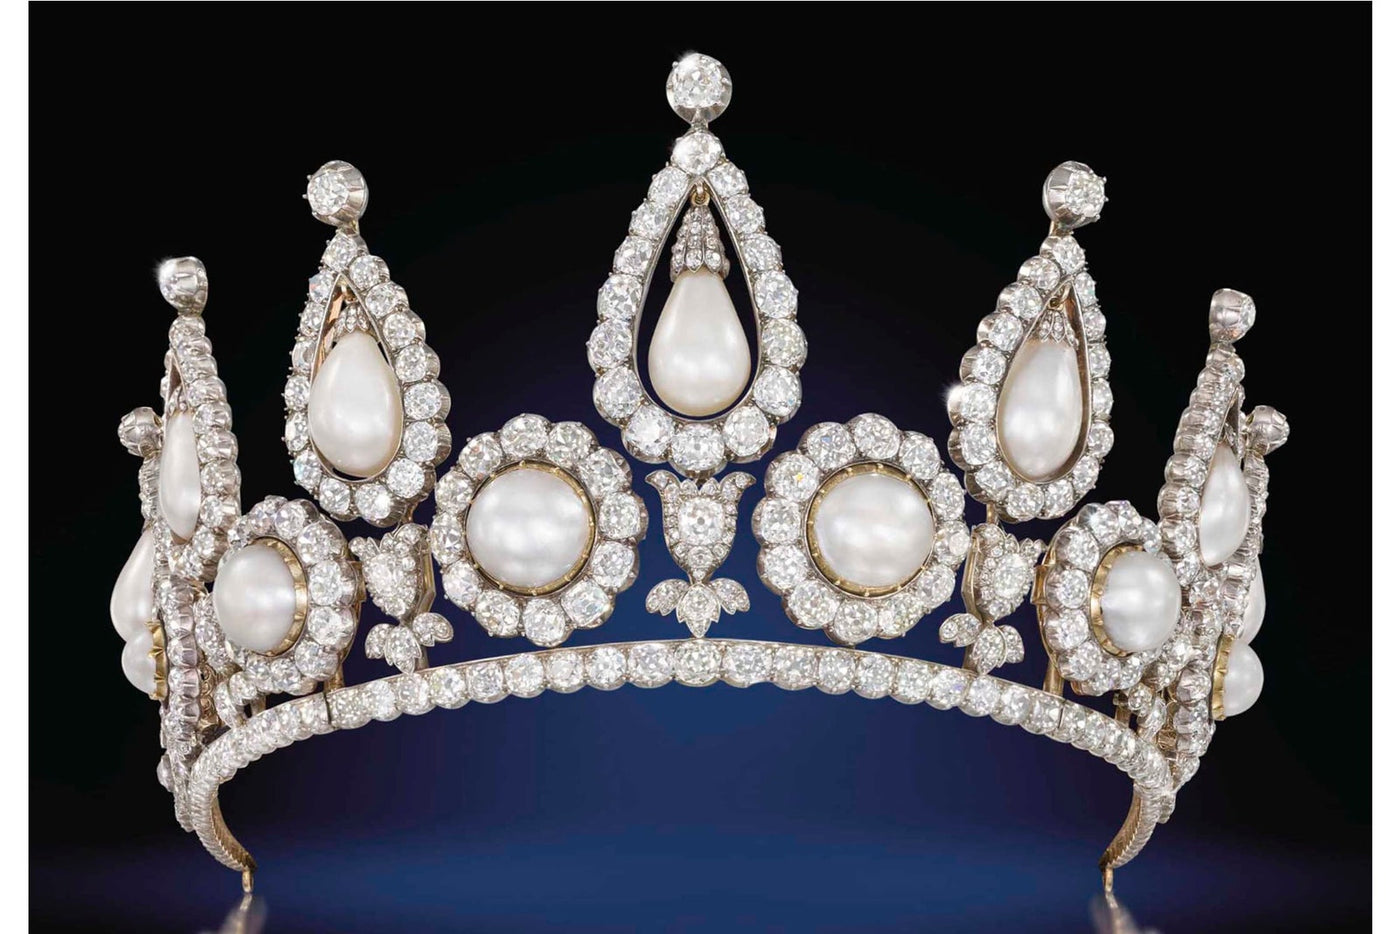 This Week's Obsession: Tiaras